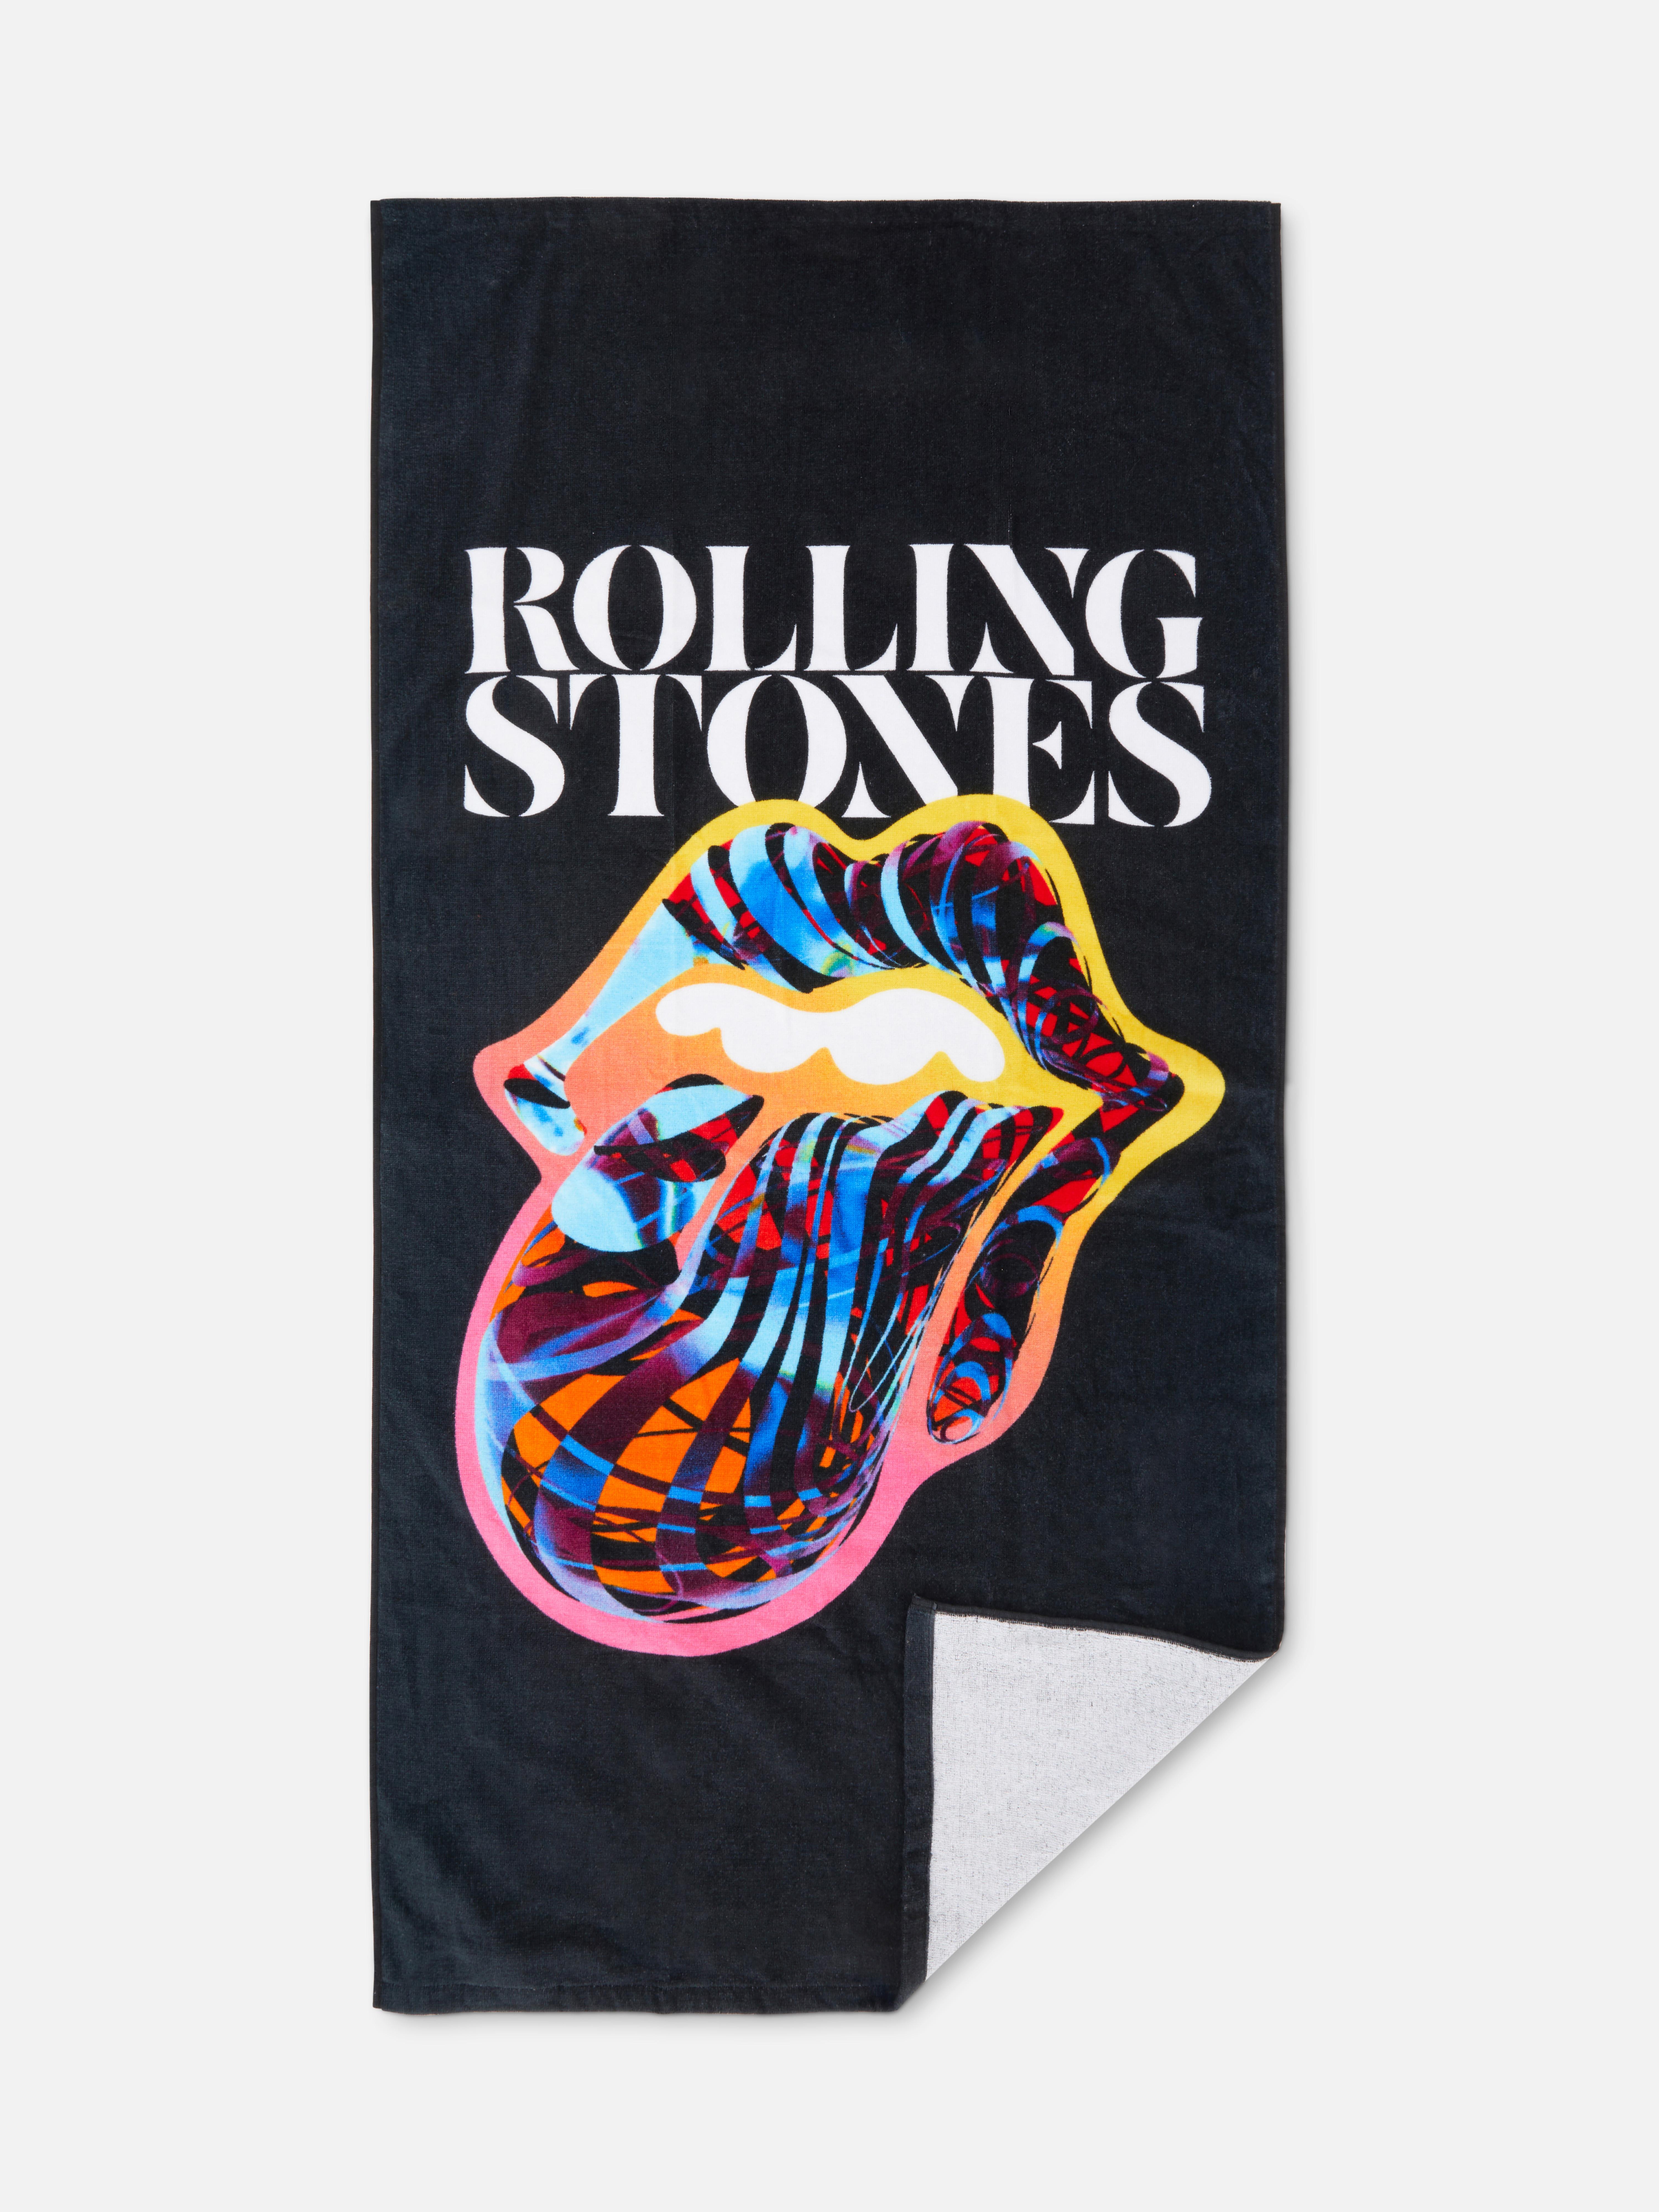 The Rolling Stones Beach Towel